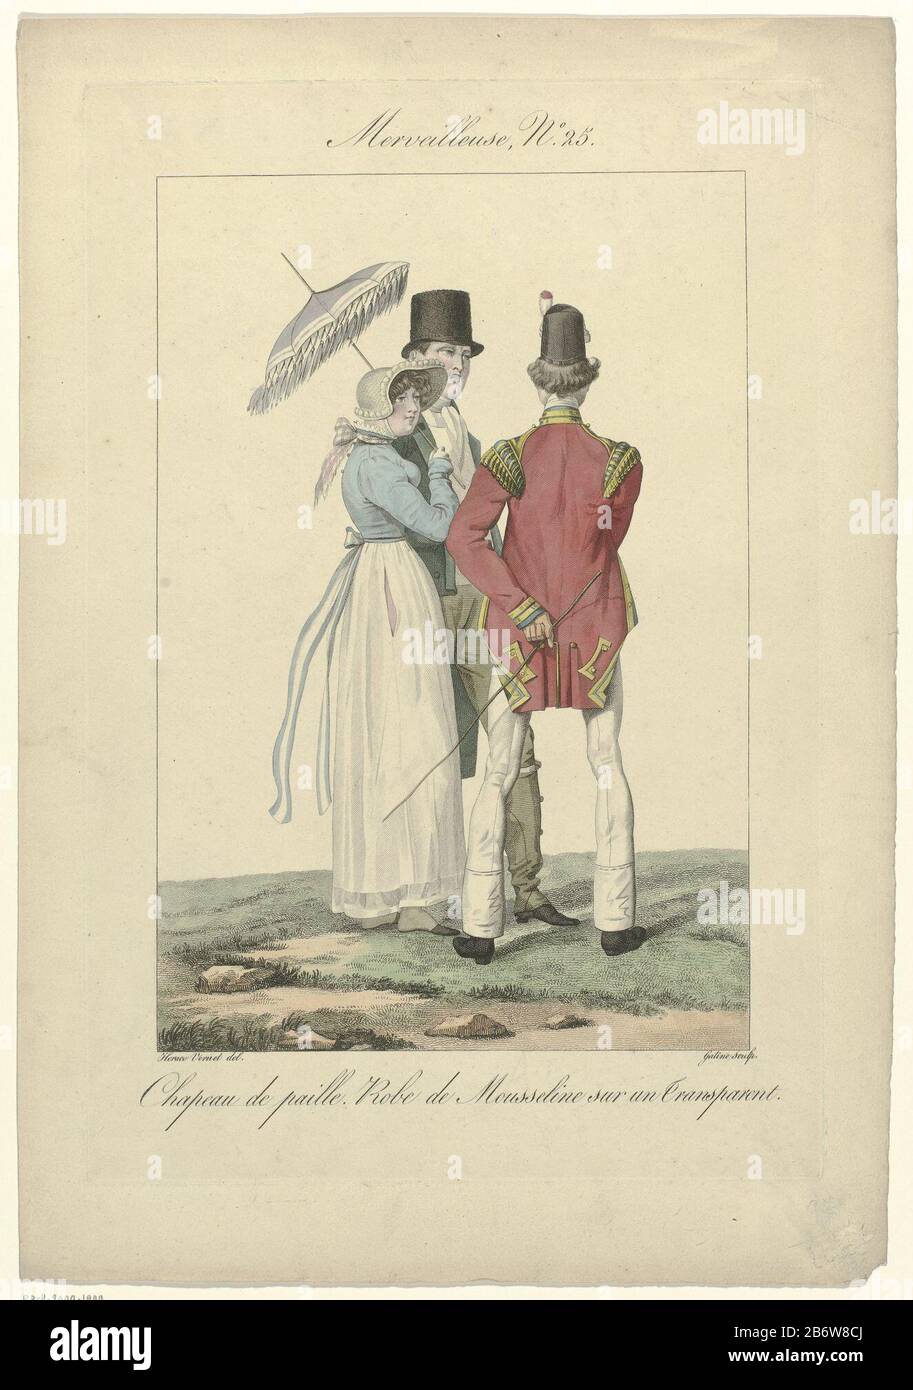 Incroyables et Merveilleuses, 1815, Merveilleuse No 25 Chapeau de paill ()  "Merveilleuse" with the head a straw hat. She wears a gown of muslin about  a 'Transparent' (petticoat). In hand umbrella trimmed